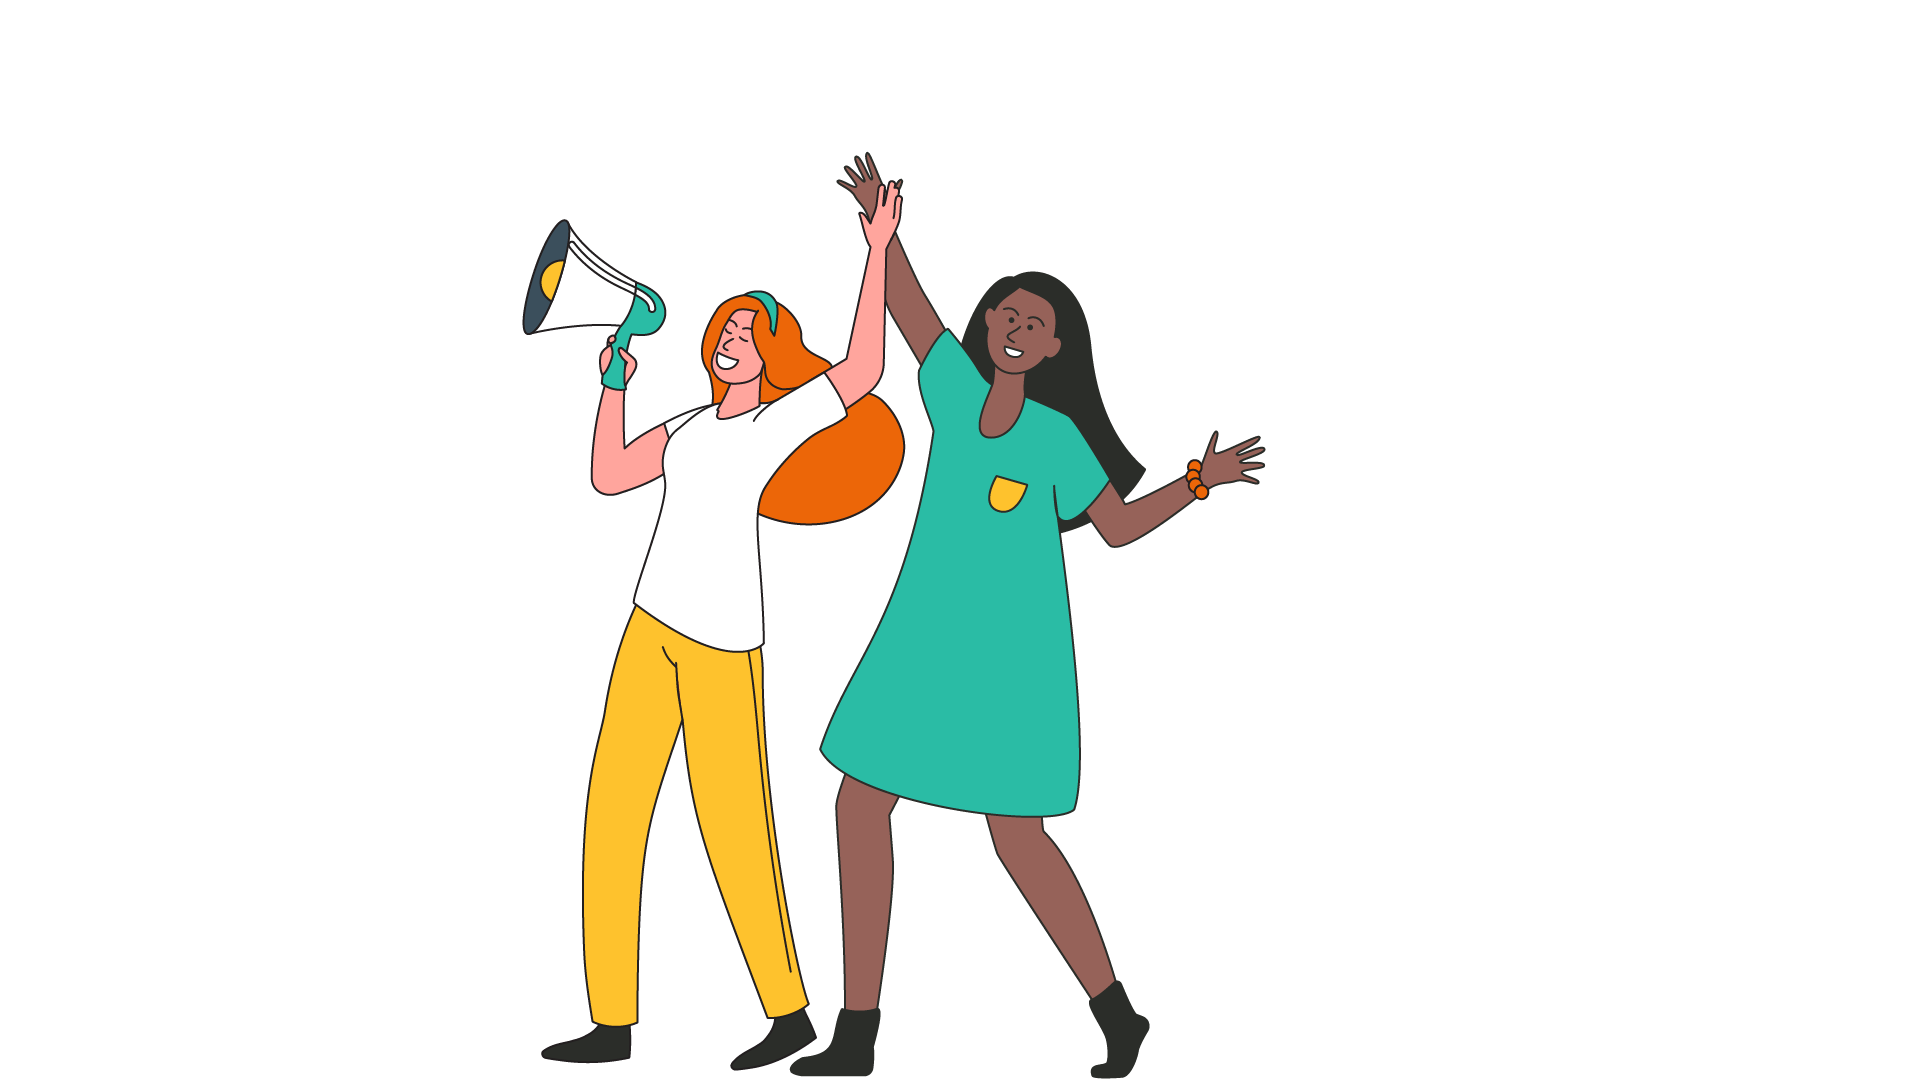 An illustration of two young women stood with a hand in the air, celebrating. One young woman is holding a speaker.